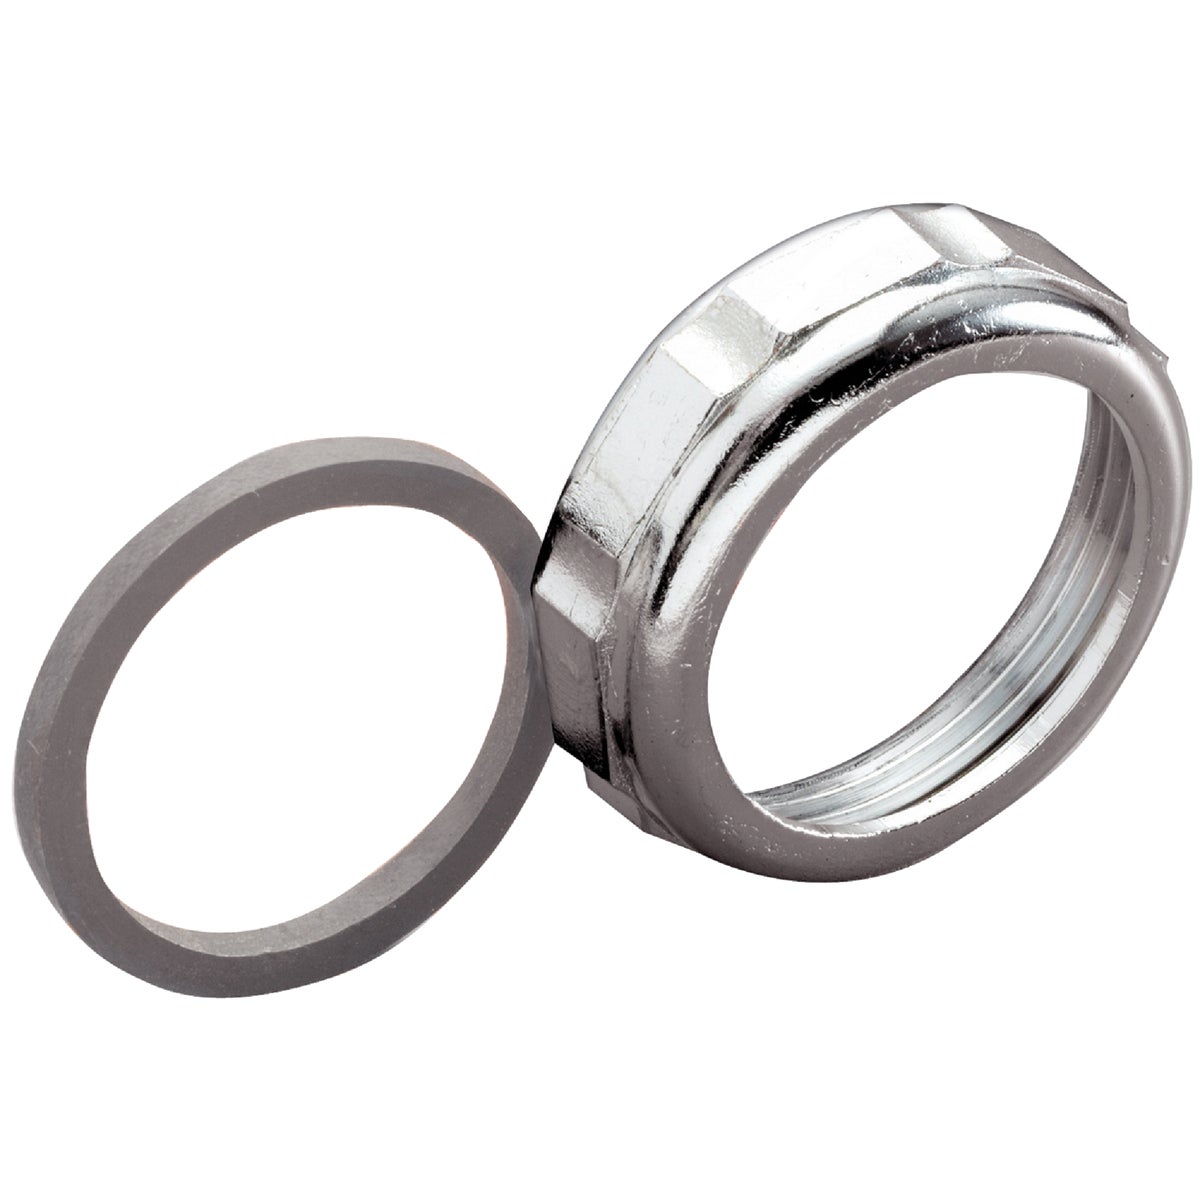 Item 495344, Chrome-plated die-cast nut with poly washer.